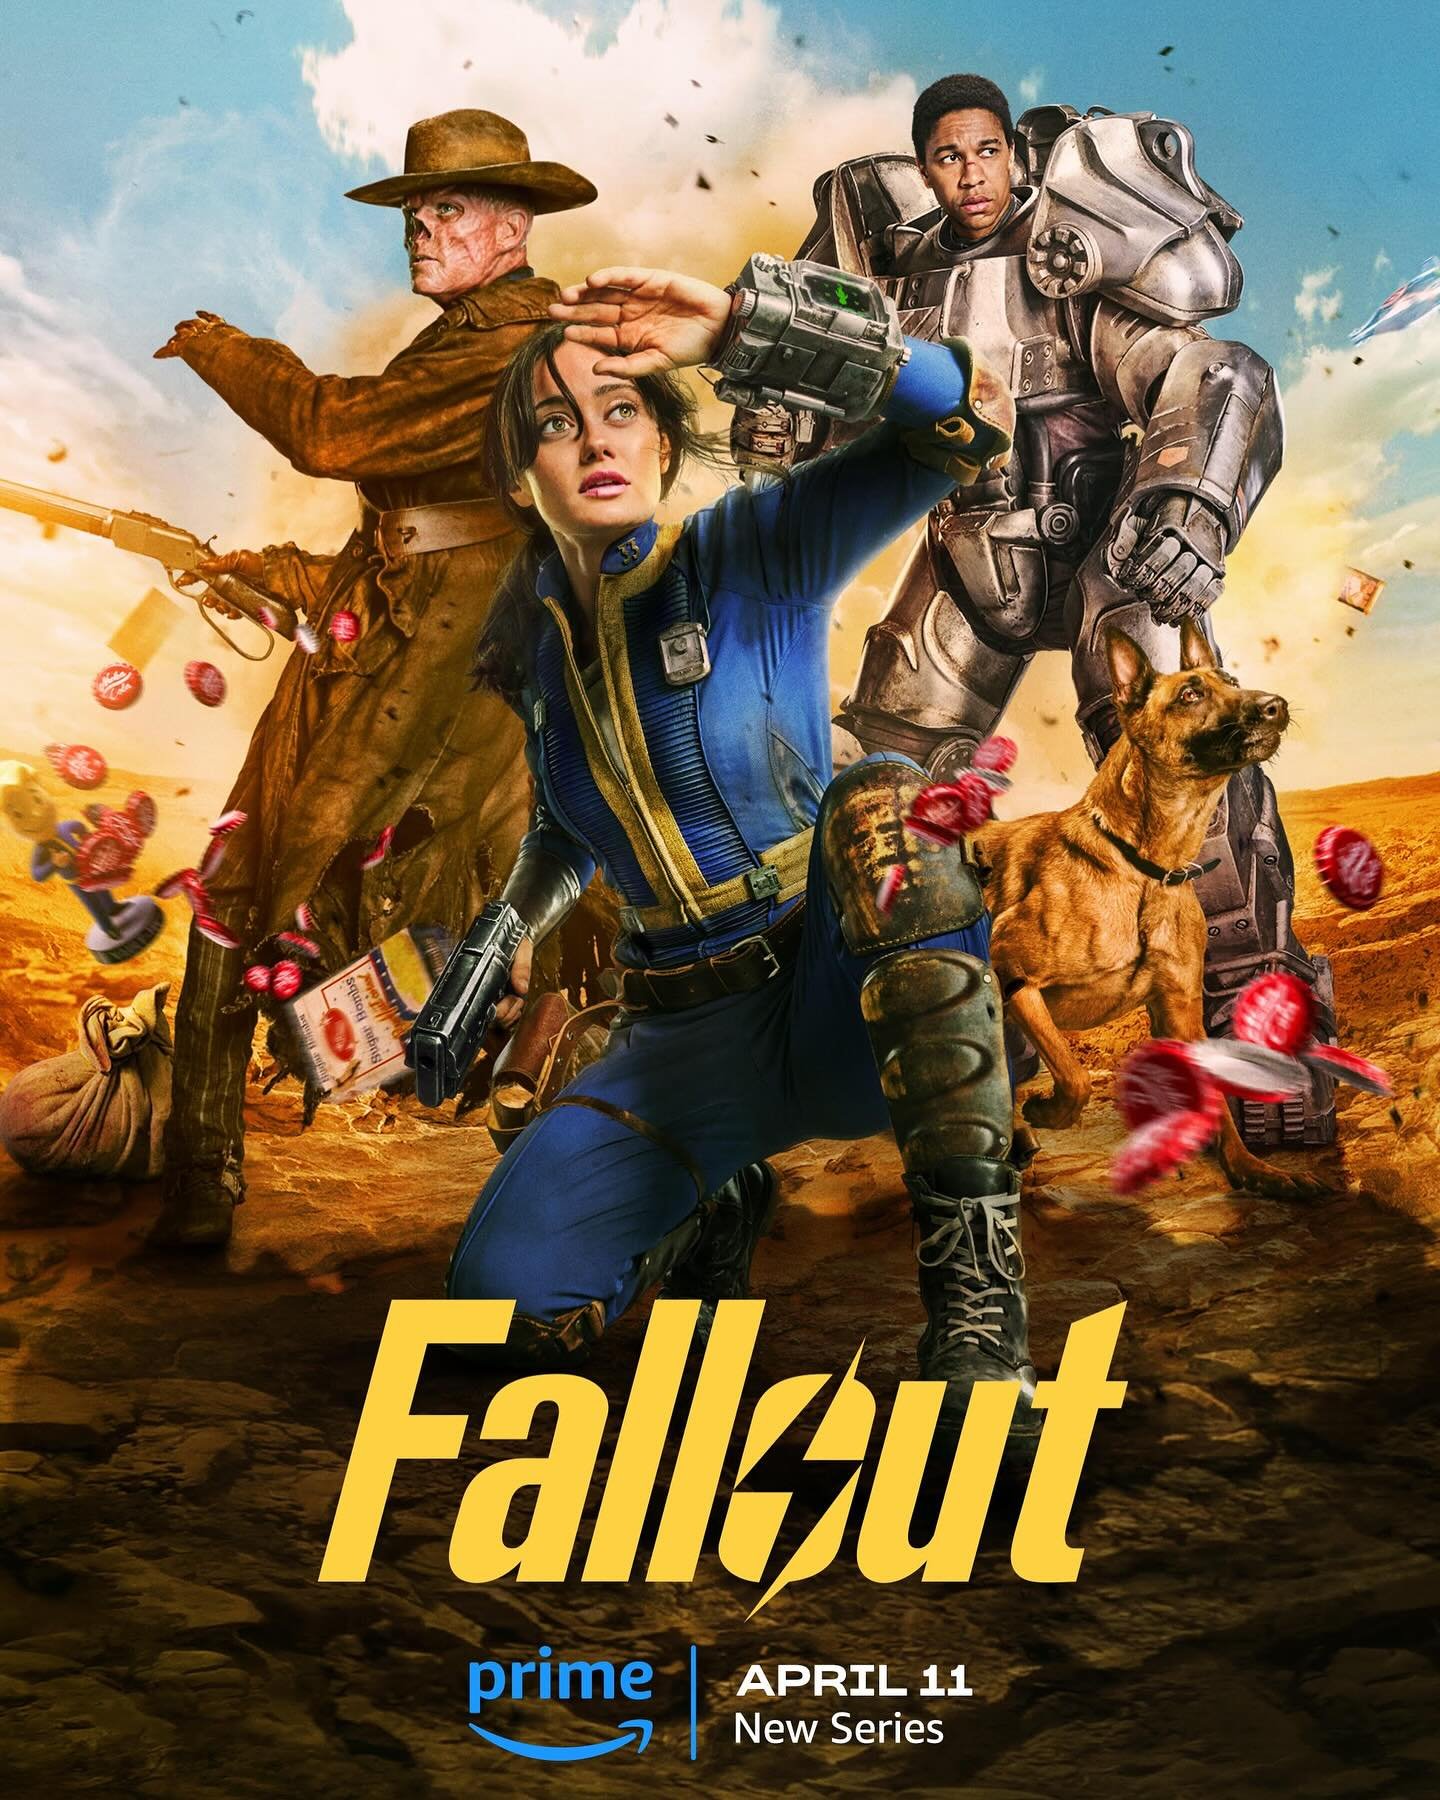 We have partnered with our friends at @primevideo to check out an upcoming screening of the first two episodes of @falloutonprime on Tuesday April 9th at 7:00 pm sharp!

Based on one of the greatest video game series of all time, Fallout is the story